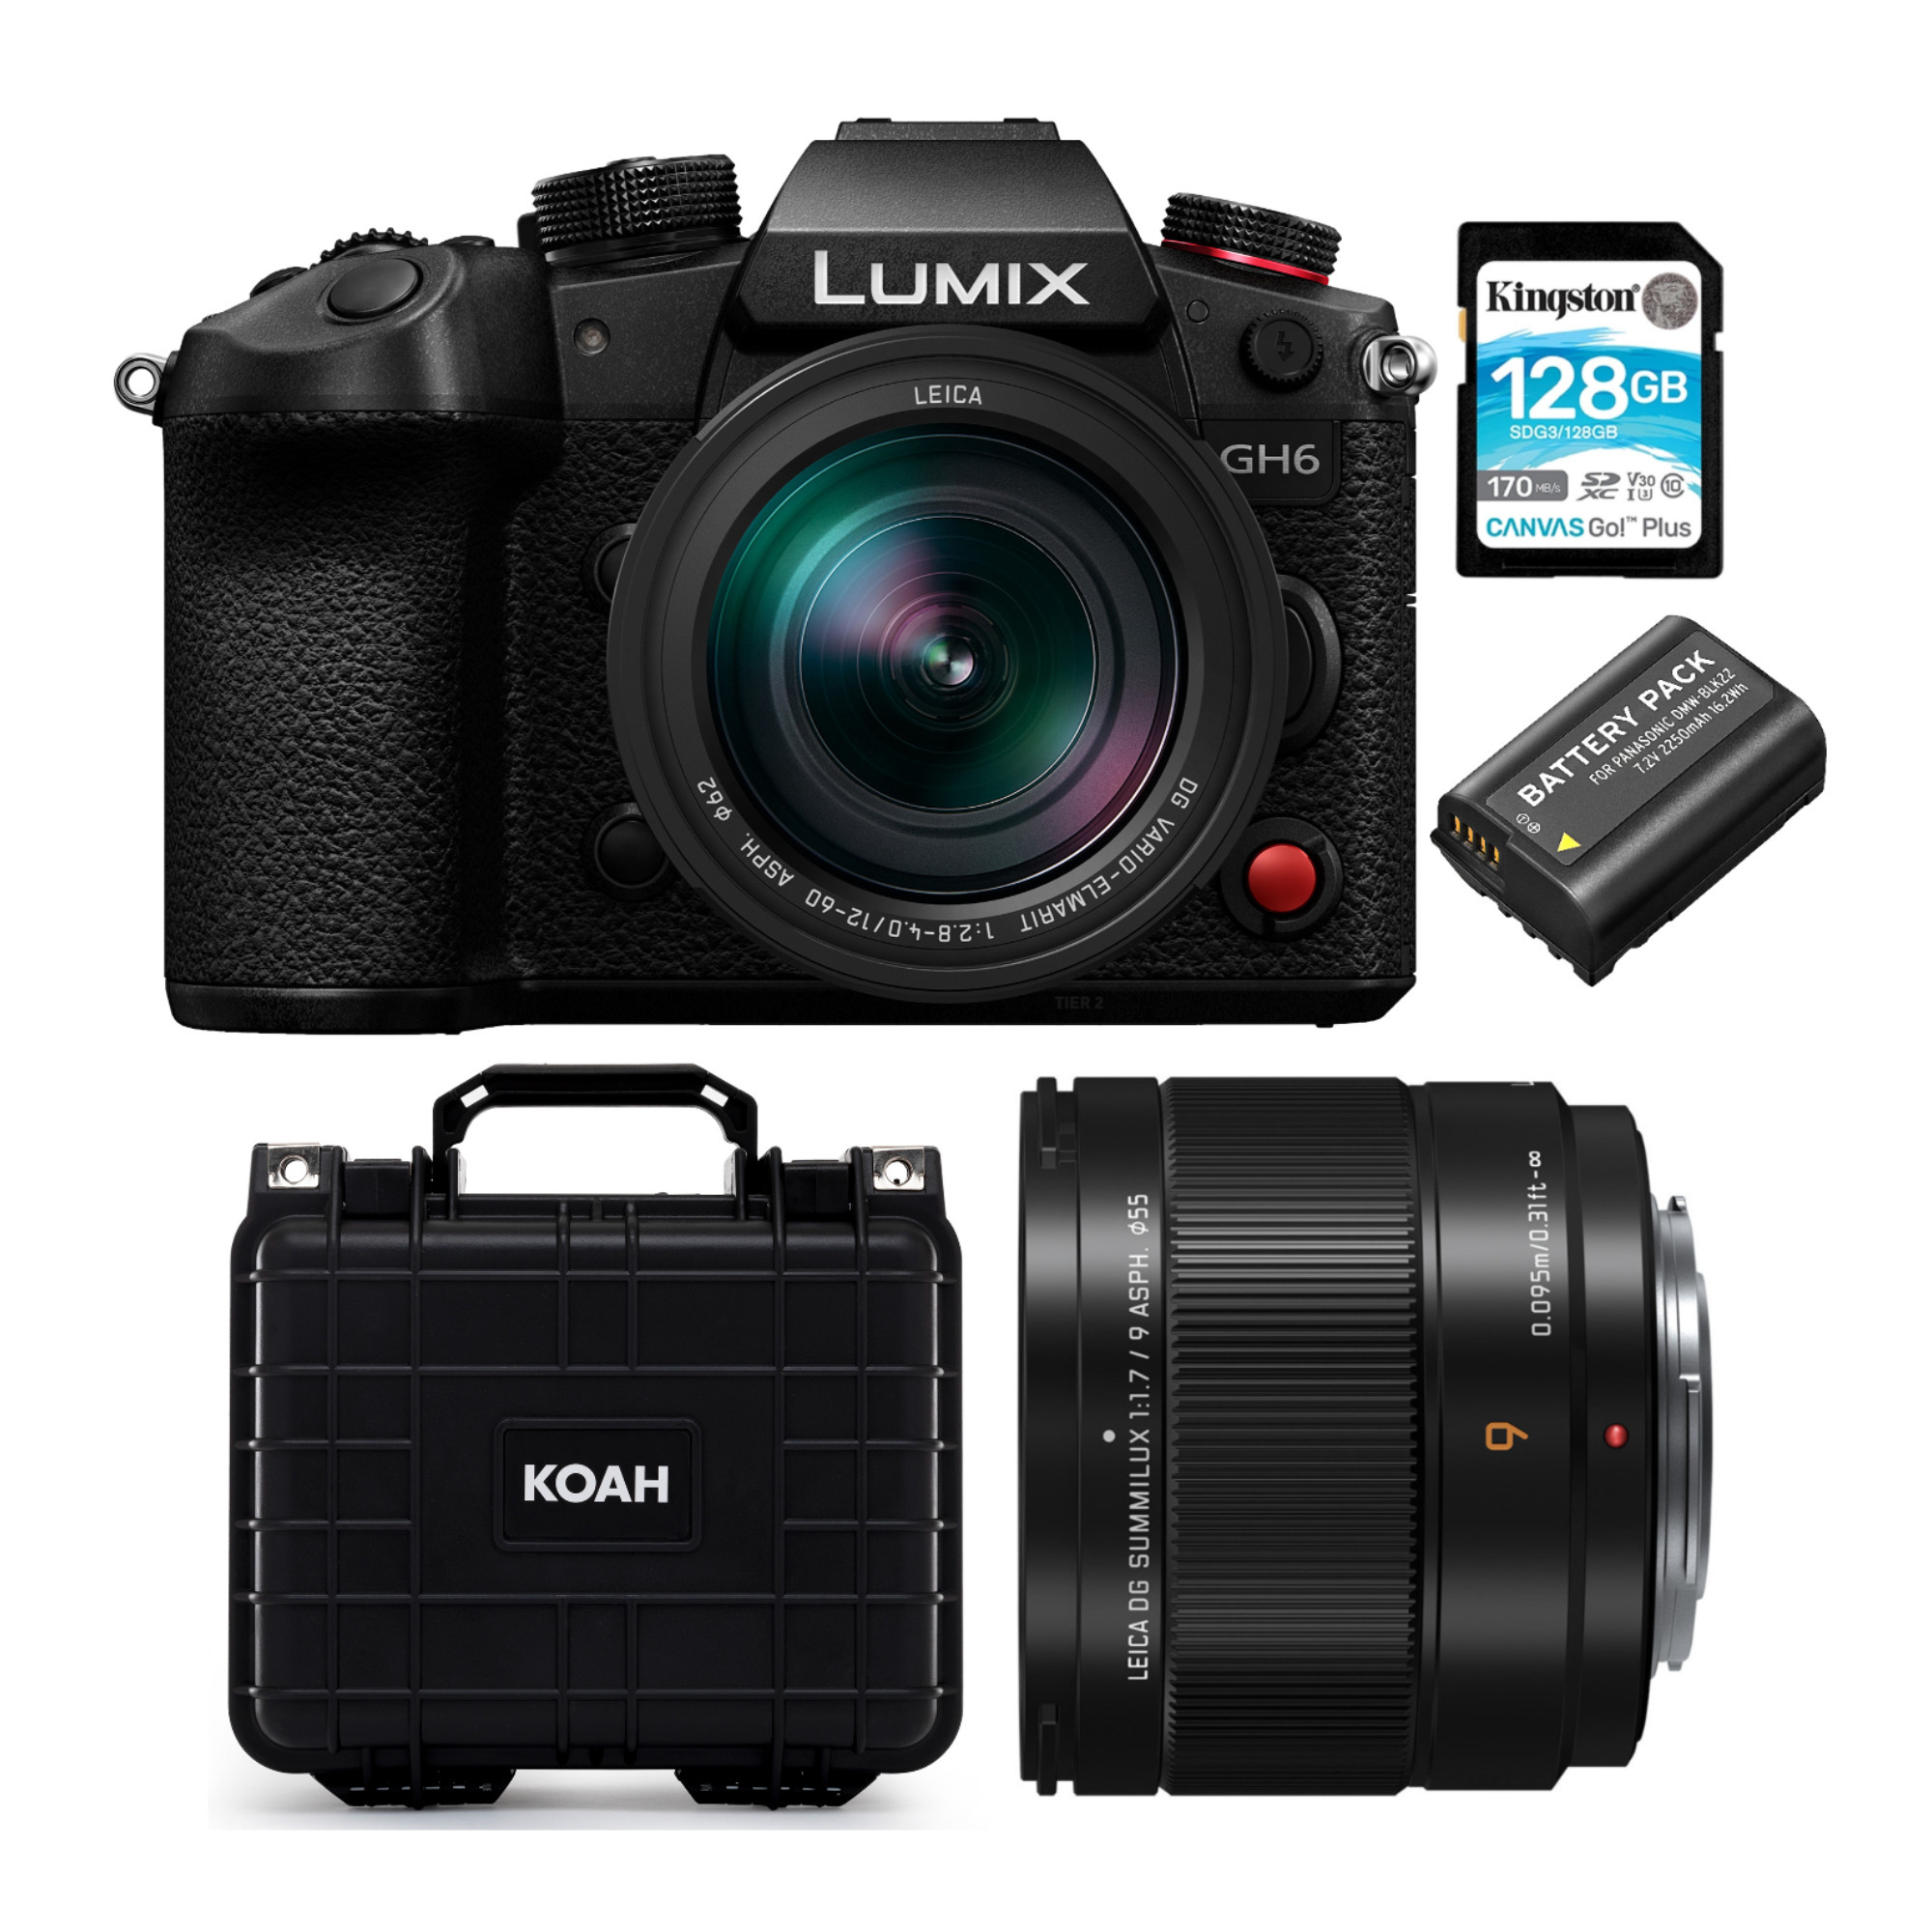 Panasonic Lumix GH6 Mirrorless Camera with 12-60mm f/2.8-4 Camera Lens with f/1.7 LEICA SUMMILUX Bundle in Black